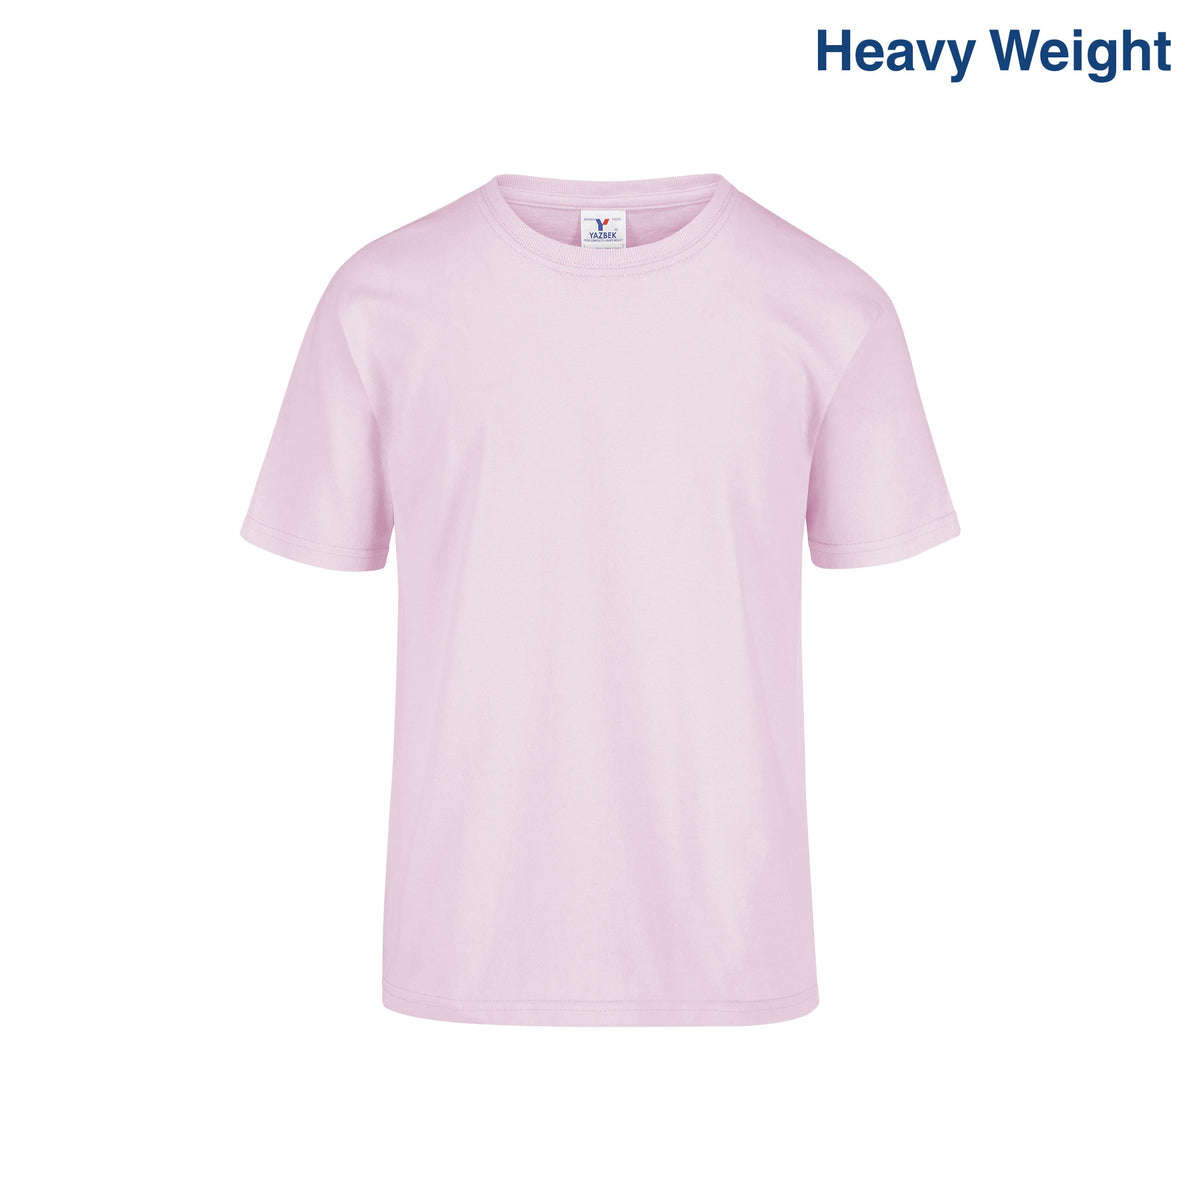 Youth’s Heavy Weight Crew Neck Short Sleeve T-Shirt (Light Pink)